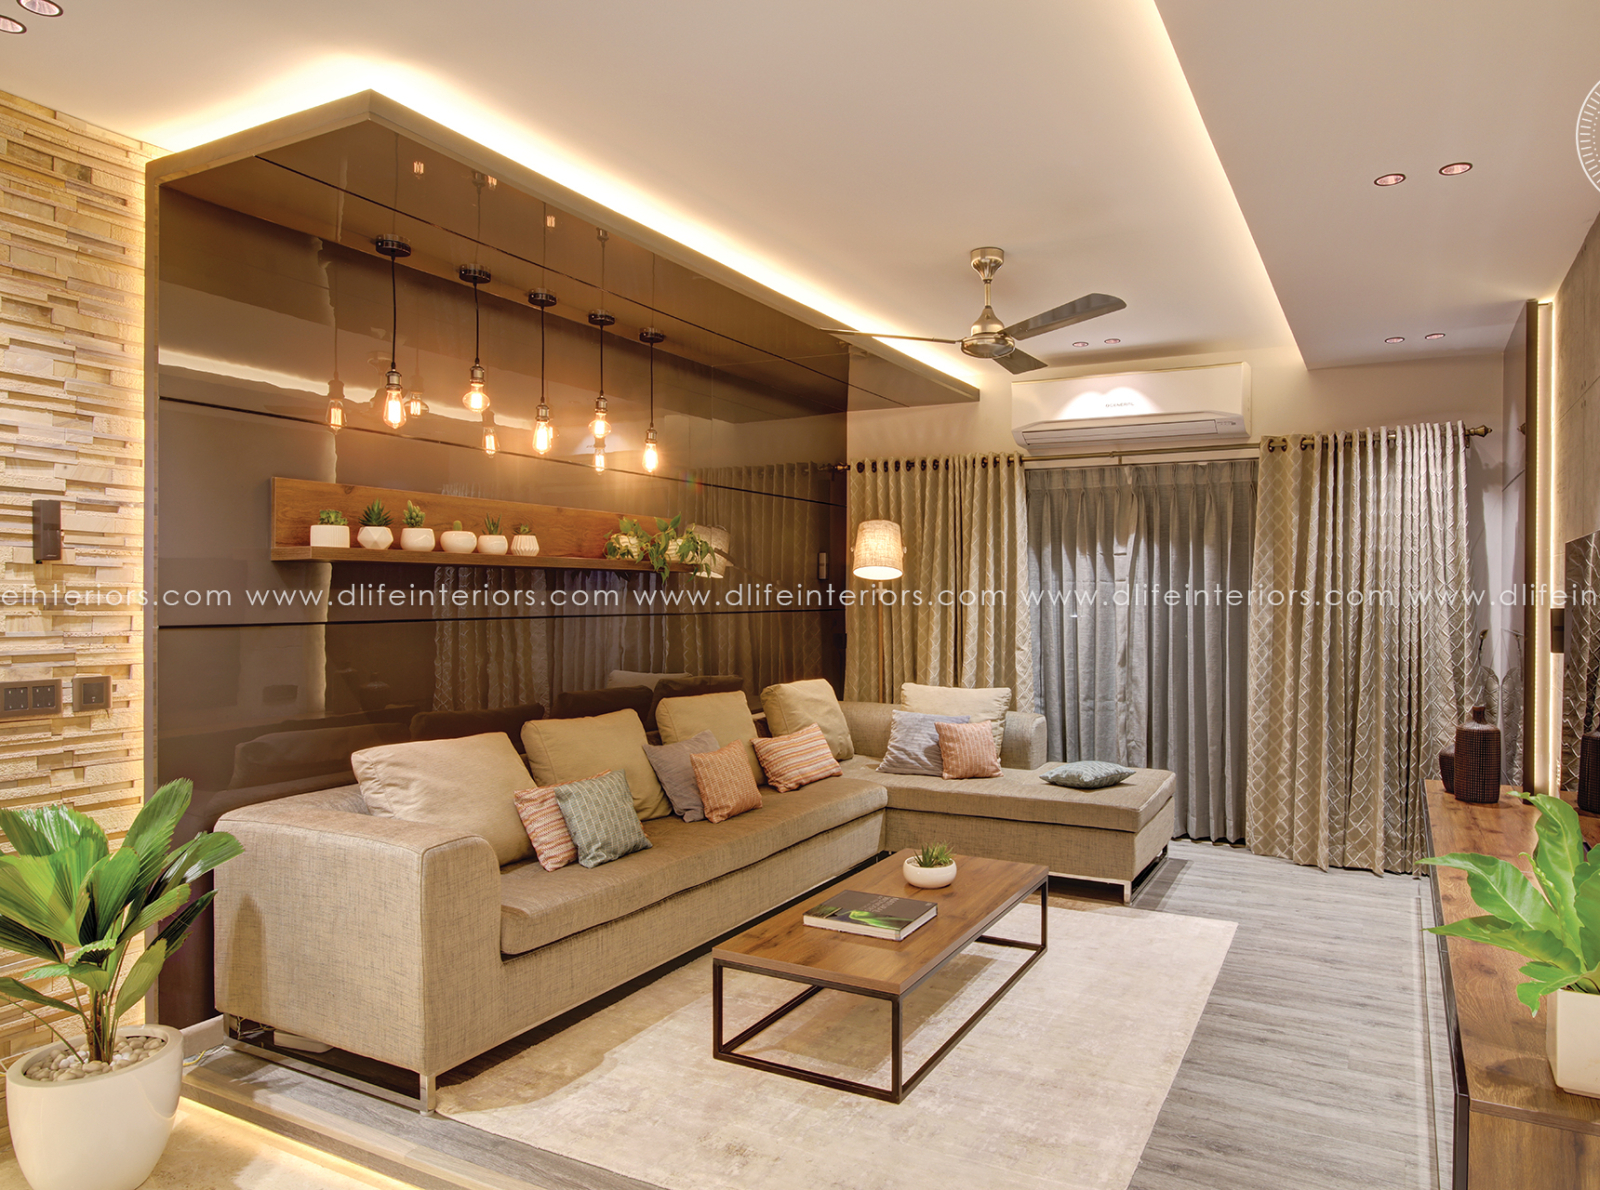 Living Room Interior Design by DLIFE Home Interiors on Dribbble